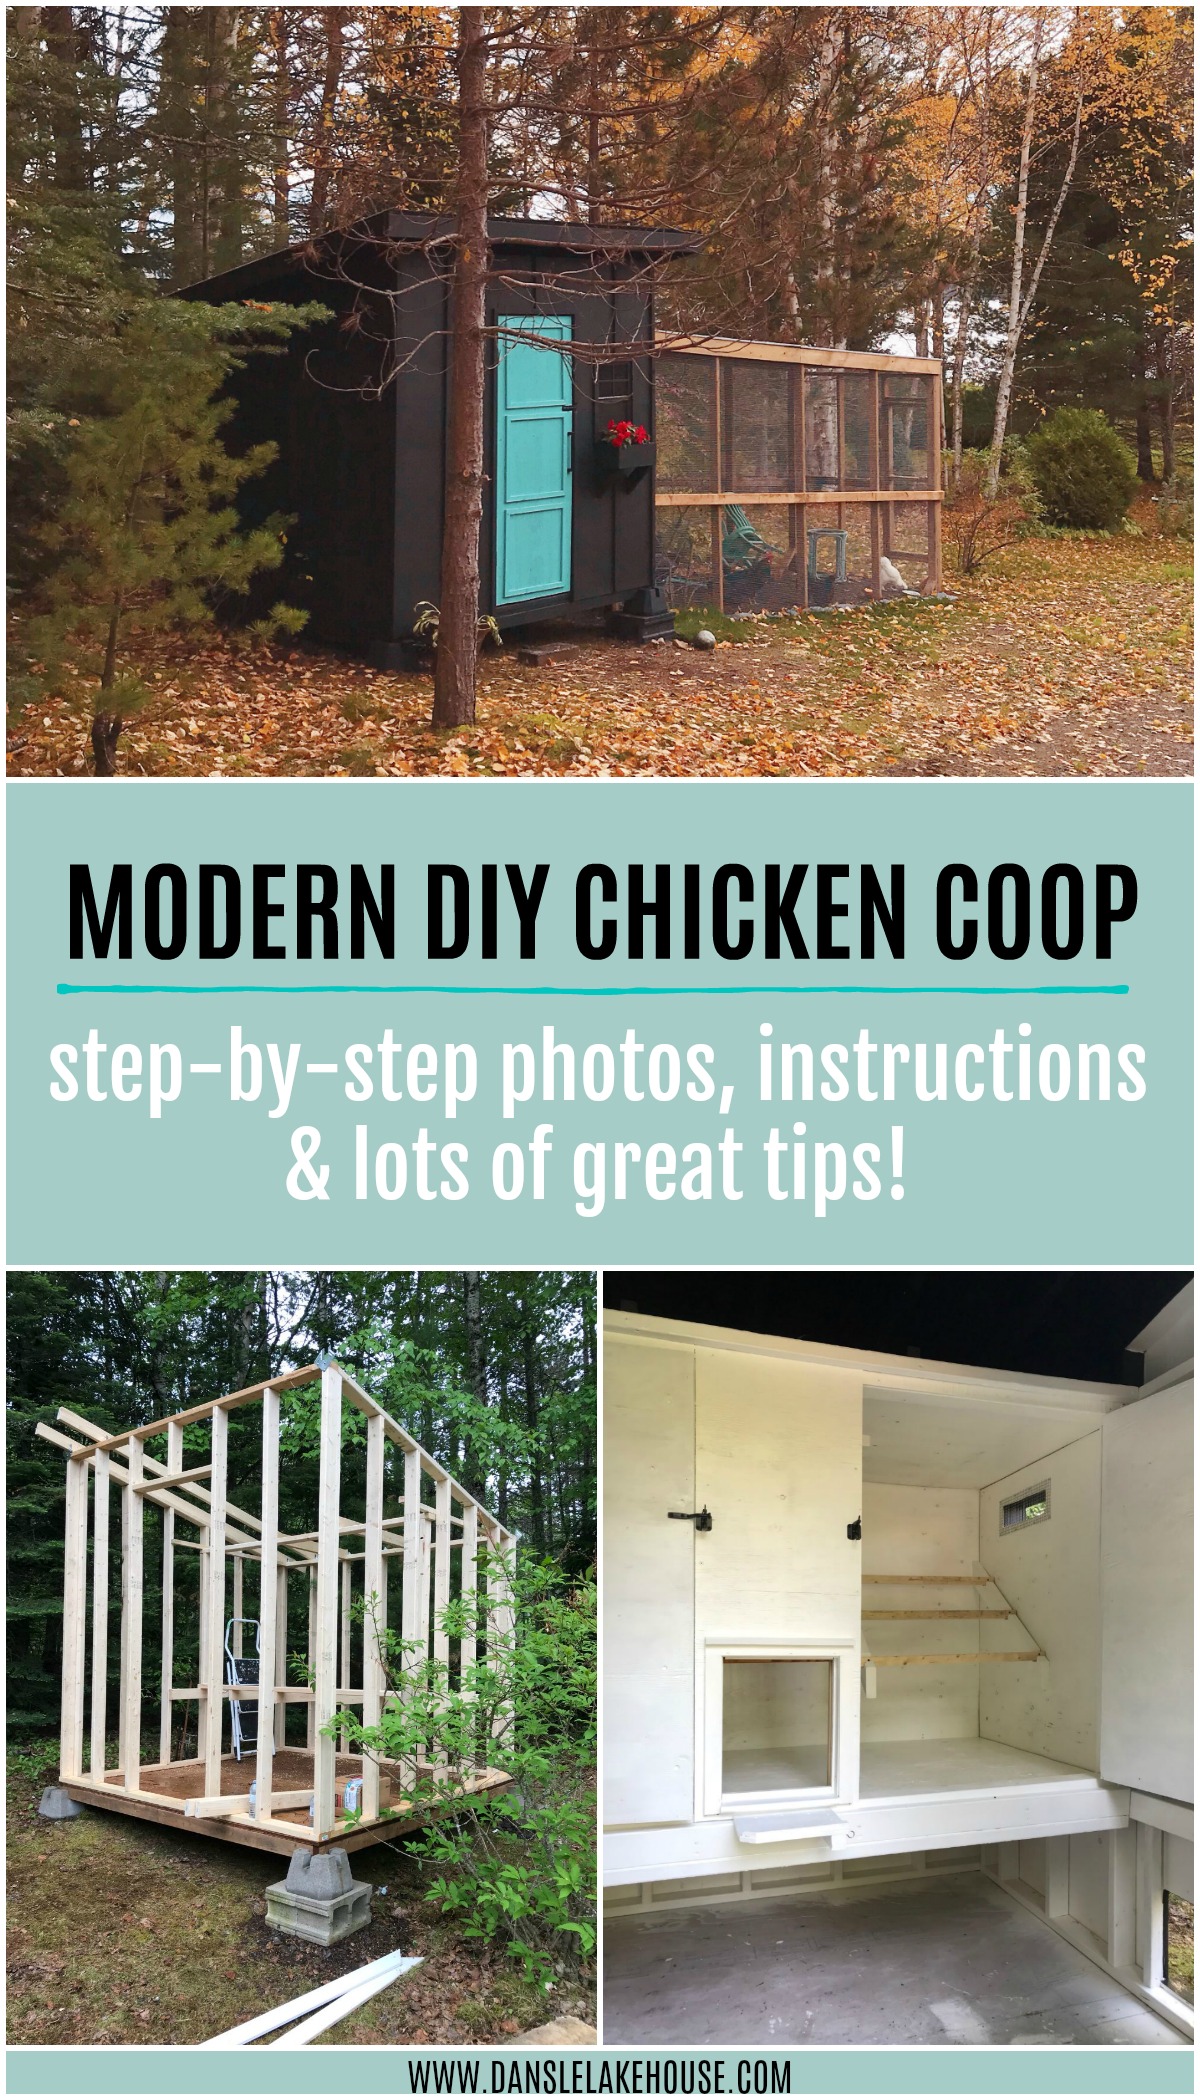 Learn How to Build this Modern DIY Chicken Coop